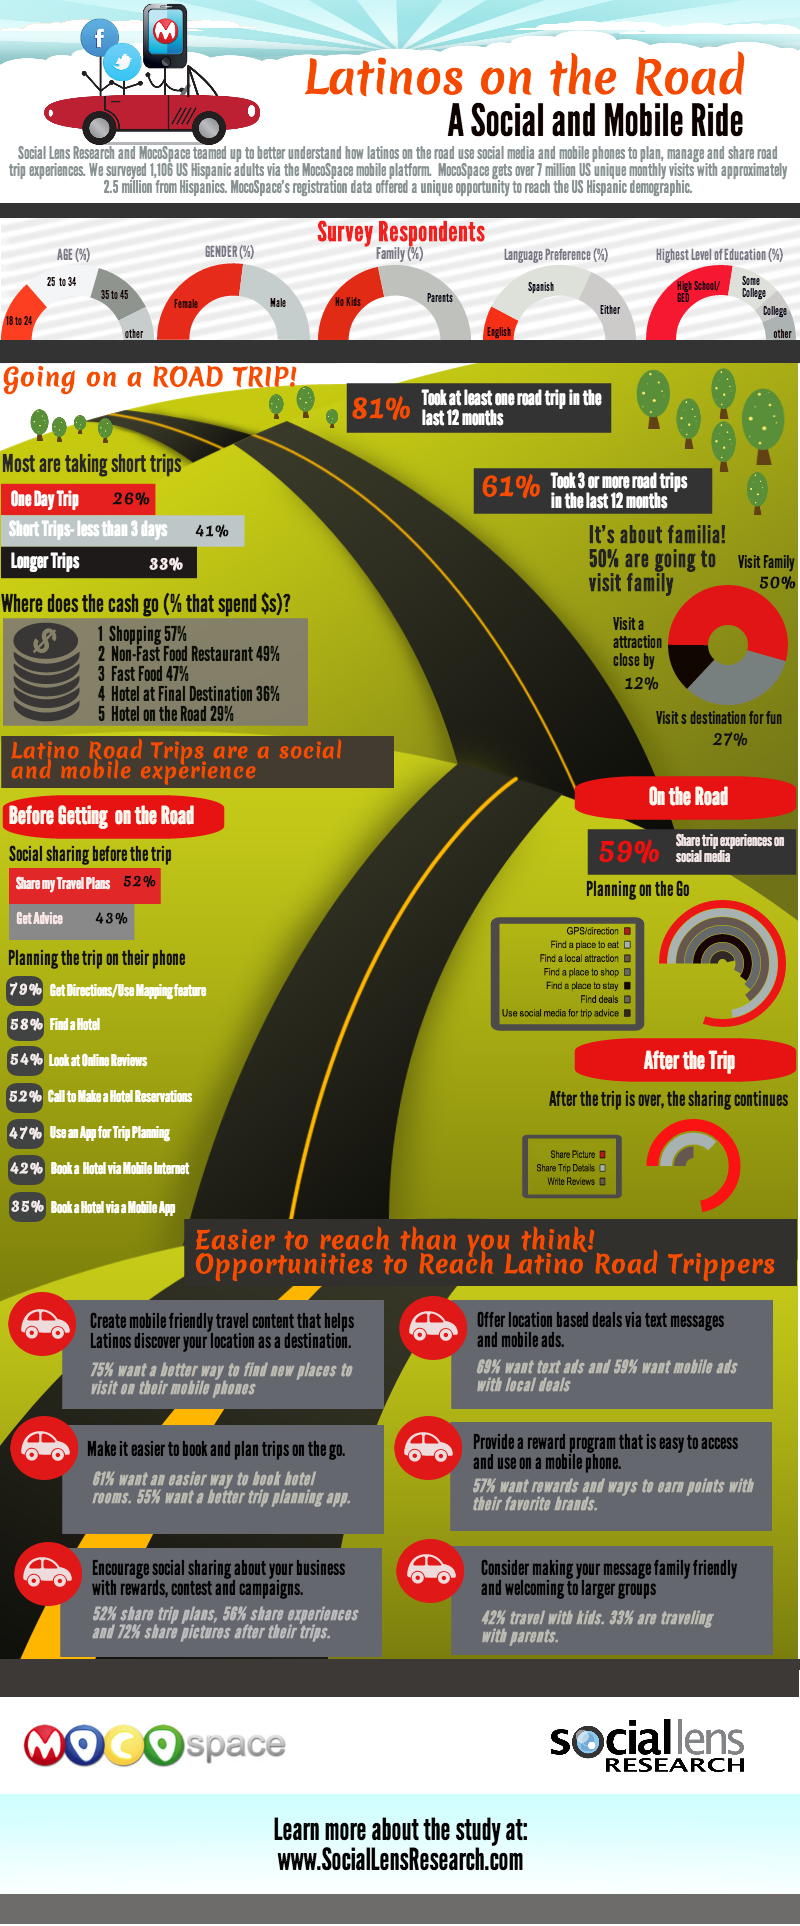 Latinos on the Road: A Social and Mobile Ride Infographic